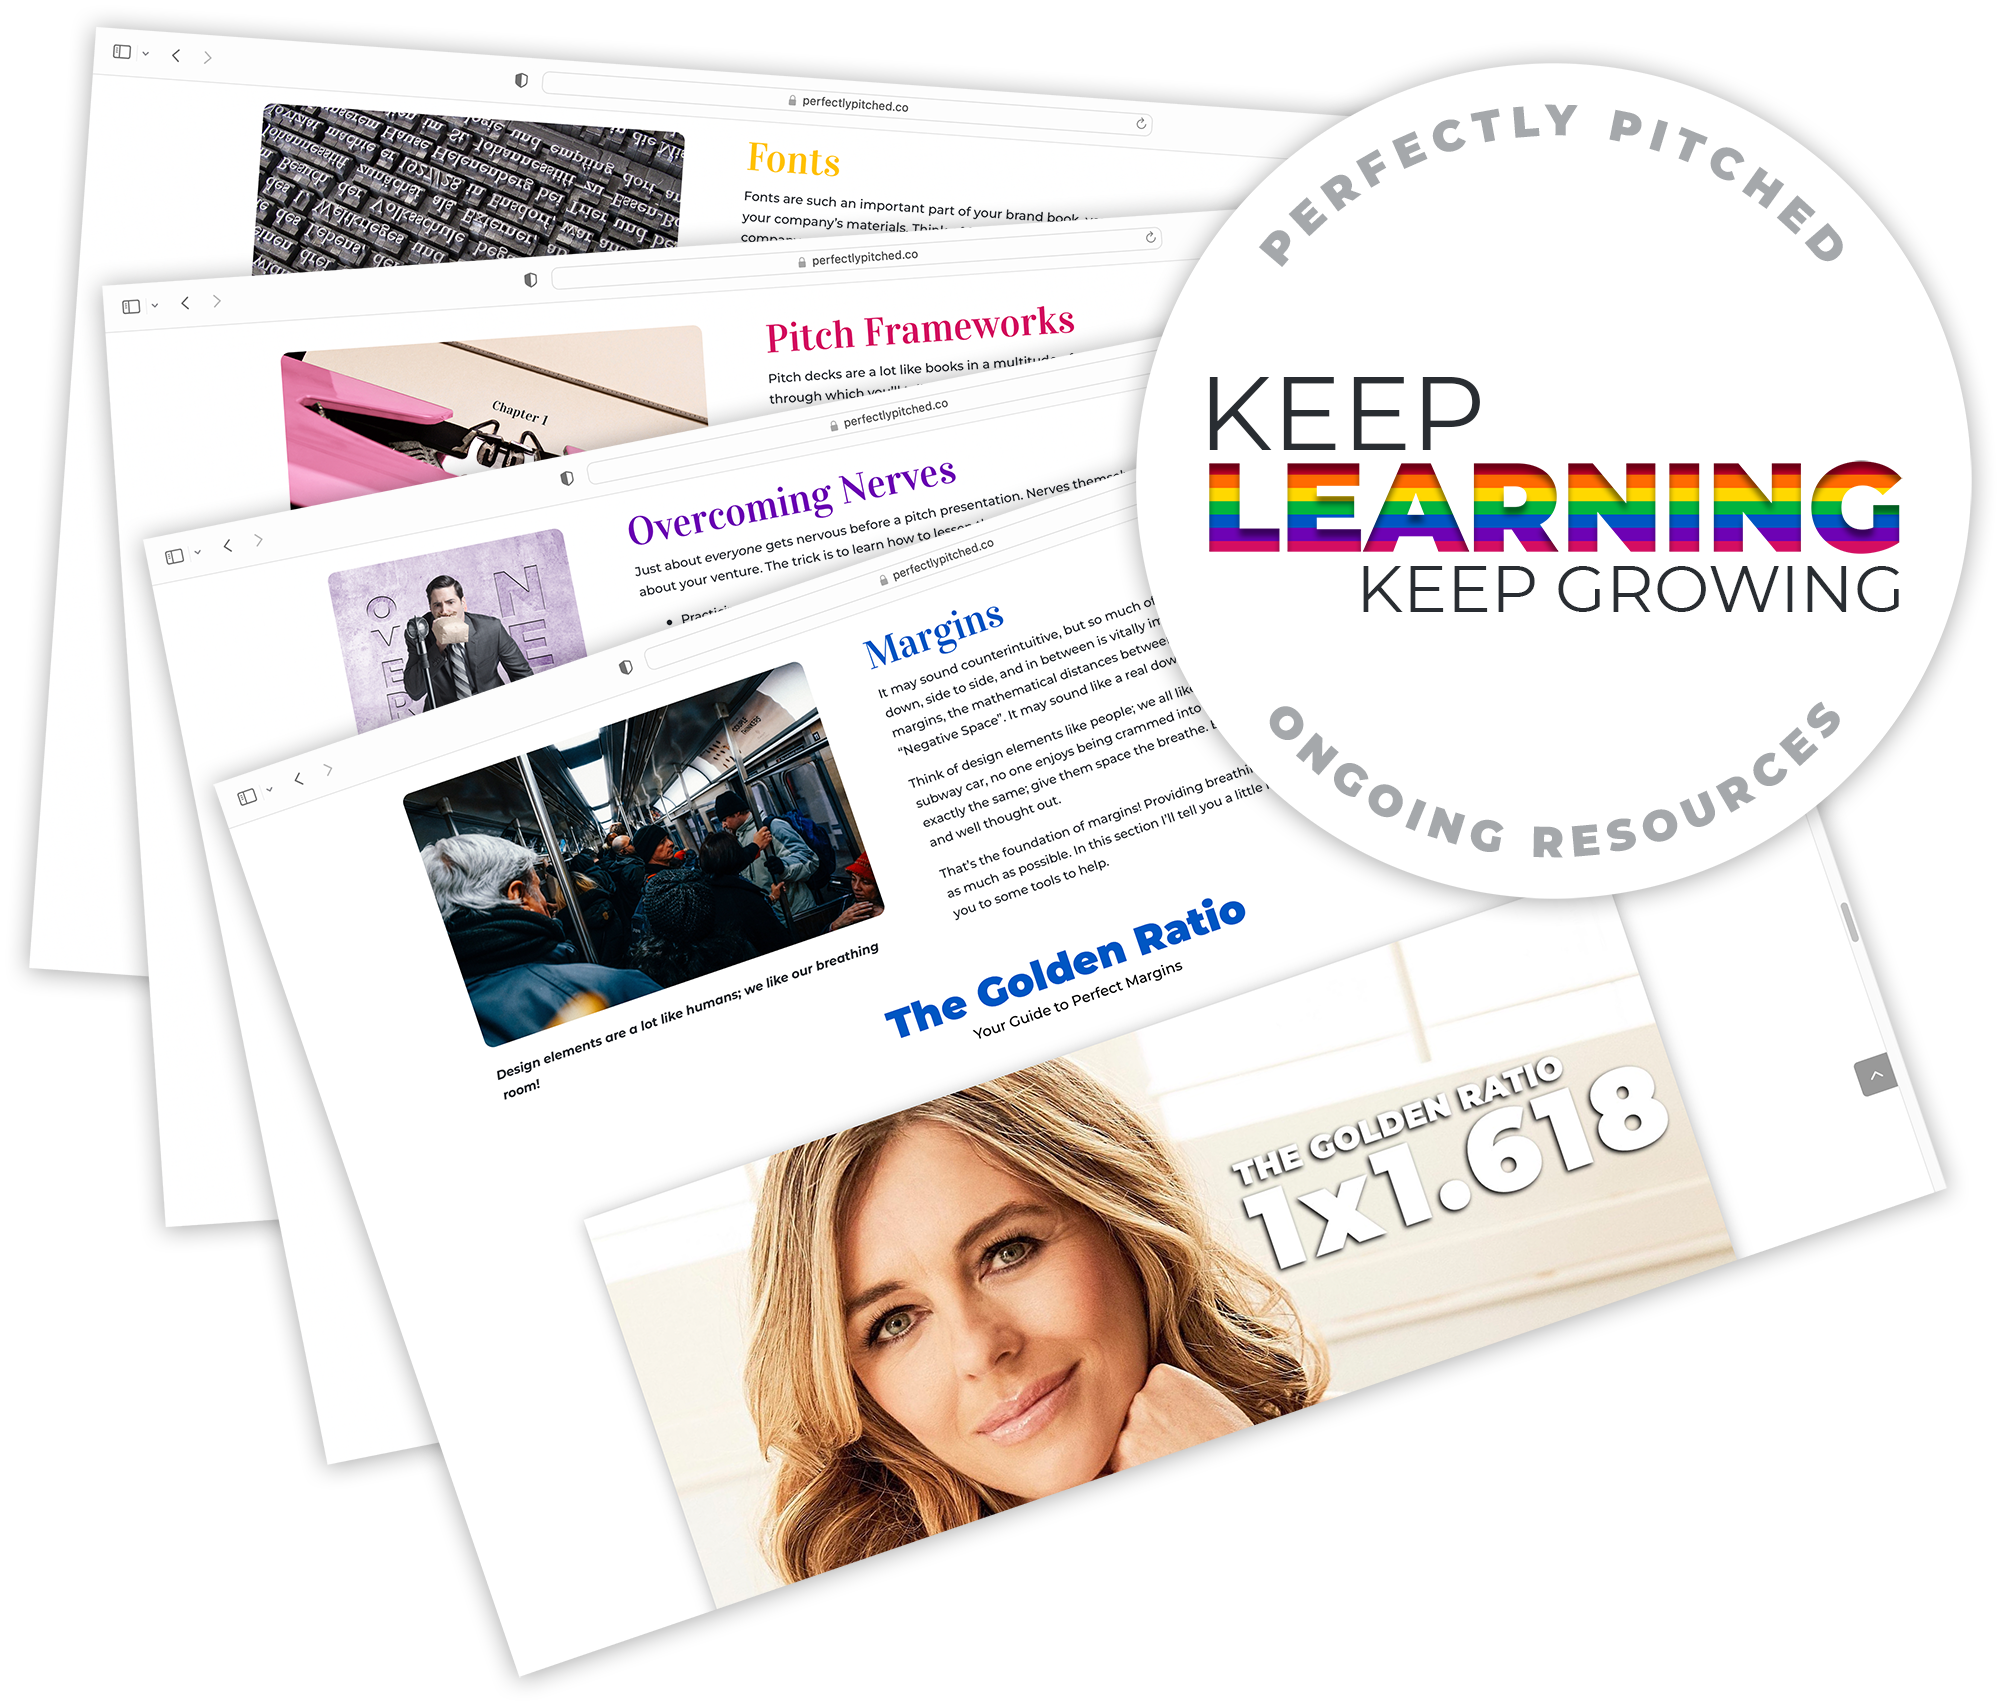 Keep Learning, Keep Growing - Perfectly Pitched Ongoing Resources. Graphic shows screenshots of a wide variety of free resources available on the Perfectly Pitched website.